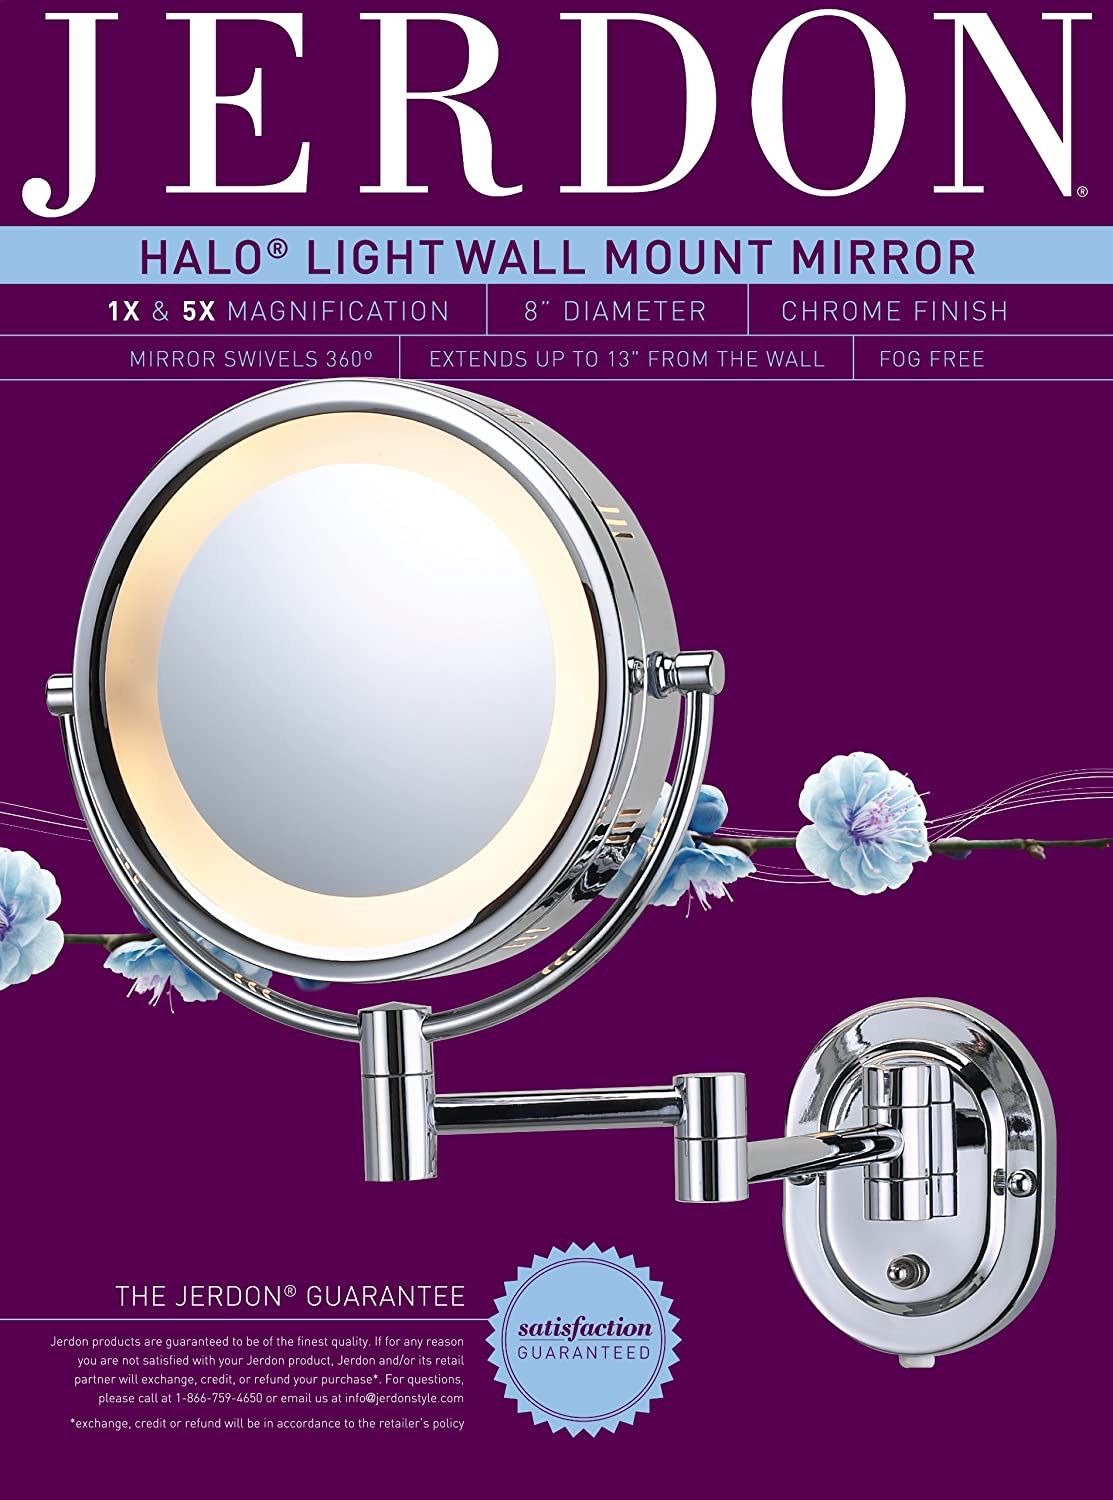 8-Inch Lighted Wall Mount Makeup Mirror with 5x Magnification, Chrome Finish